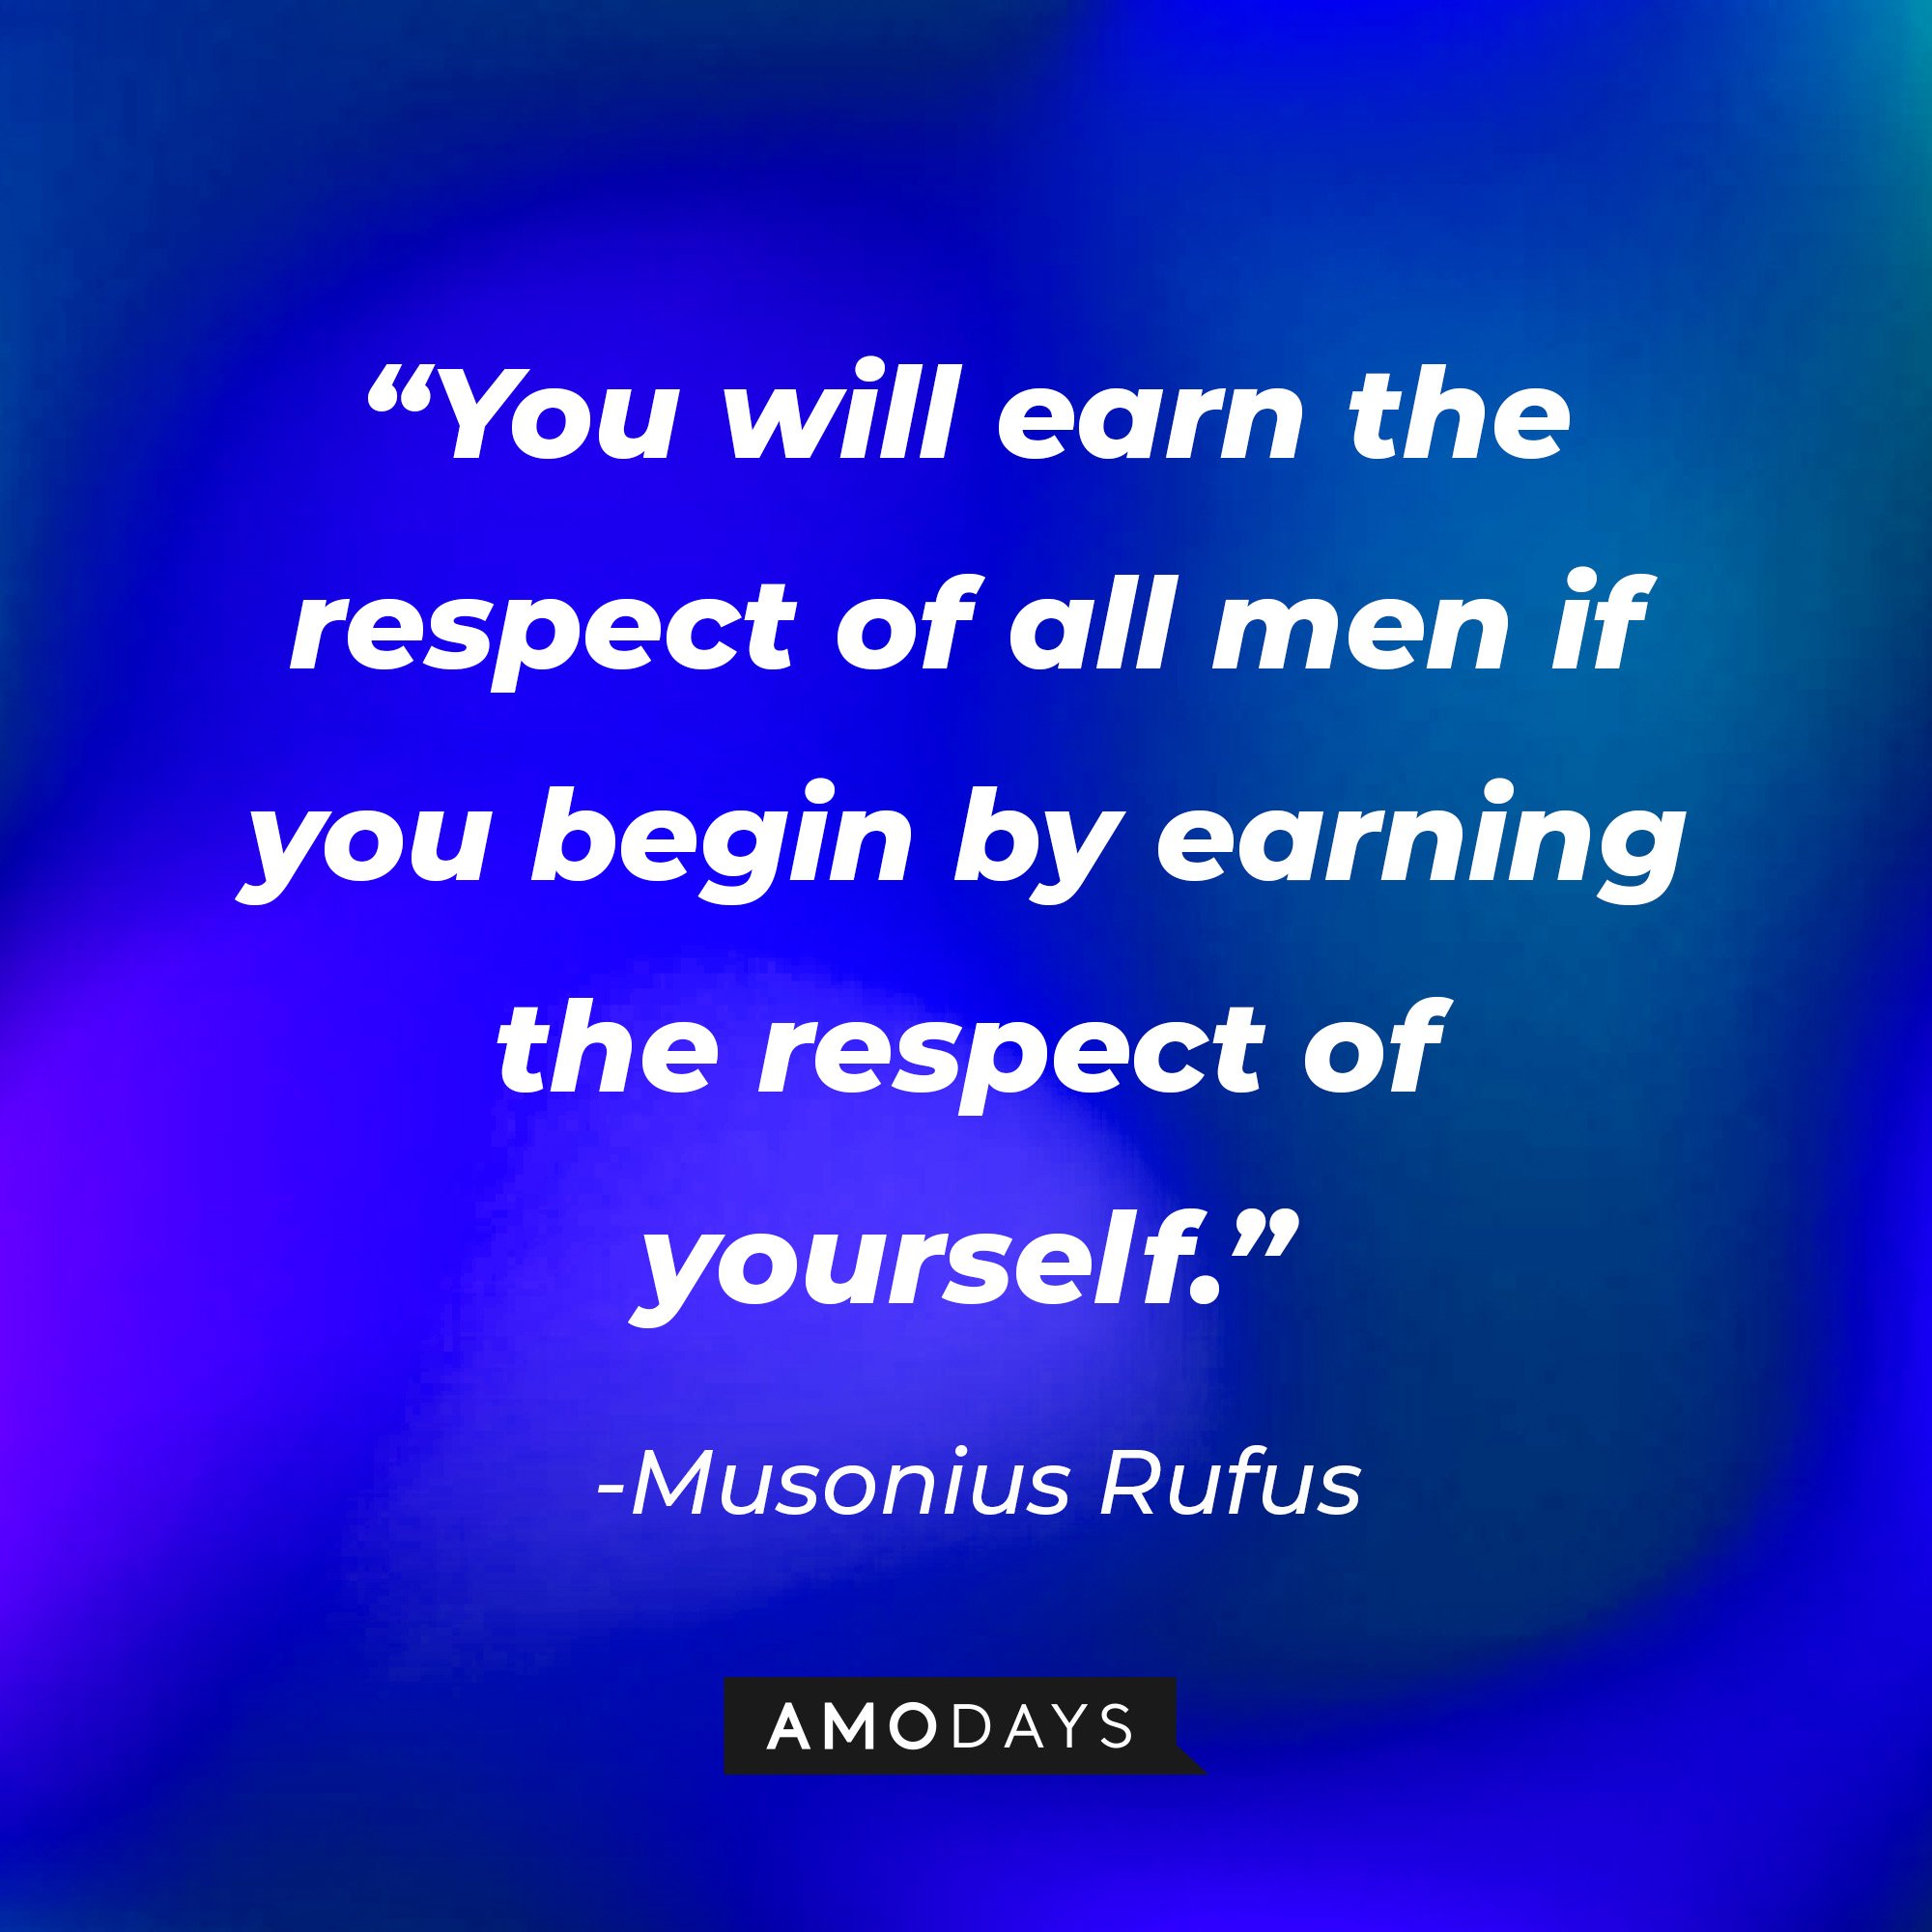 Musonius Rufus's quote: “You will earn the respect of all men if you begin by earning the respect of yourself.” | Image: AmoDays